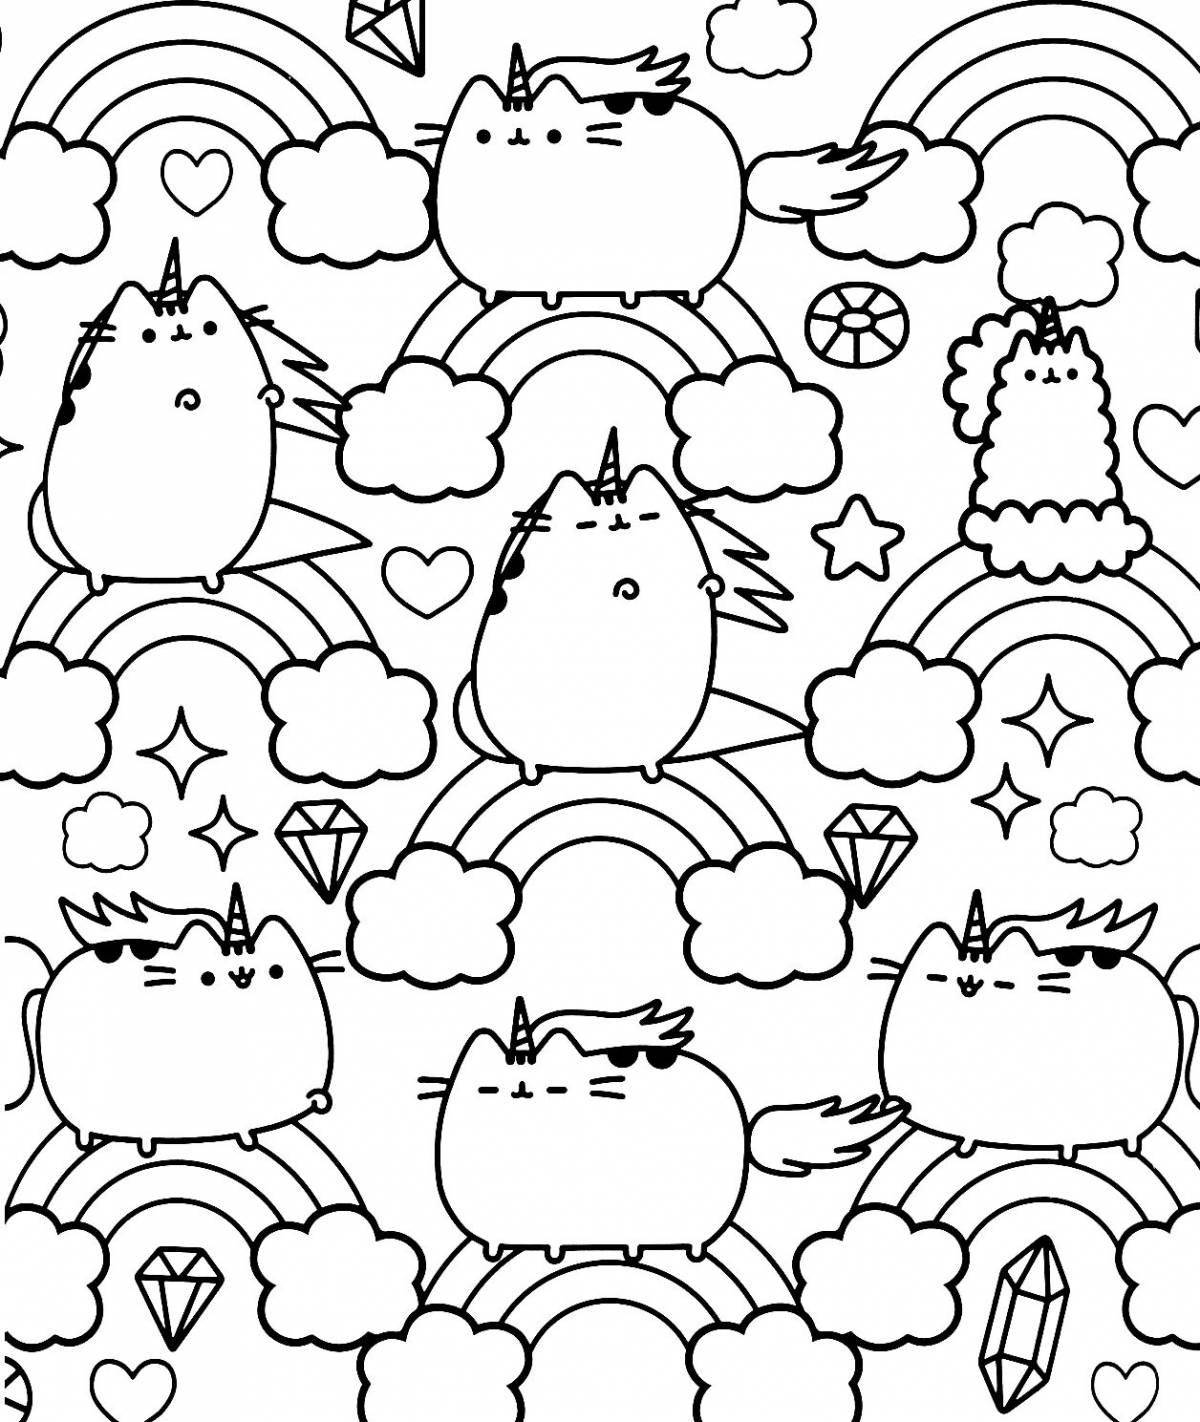 Awesome pusheen mermaid coloring page